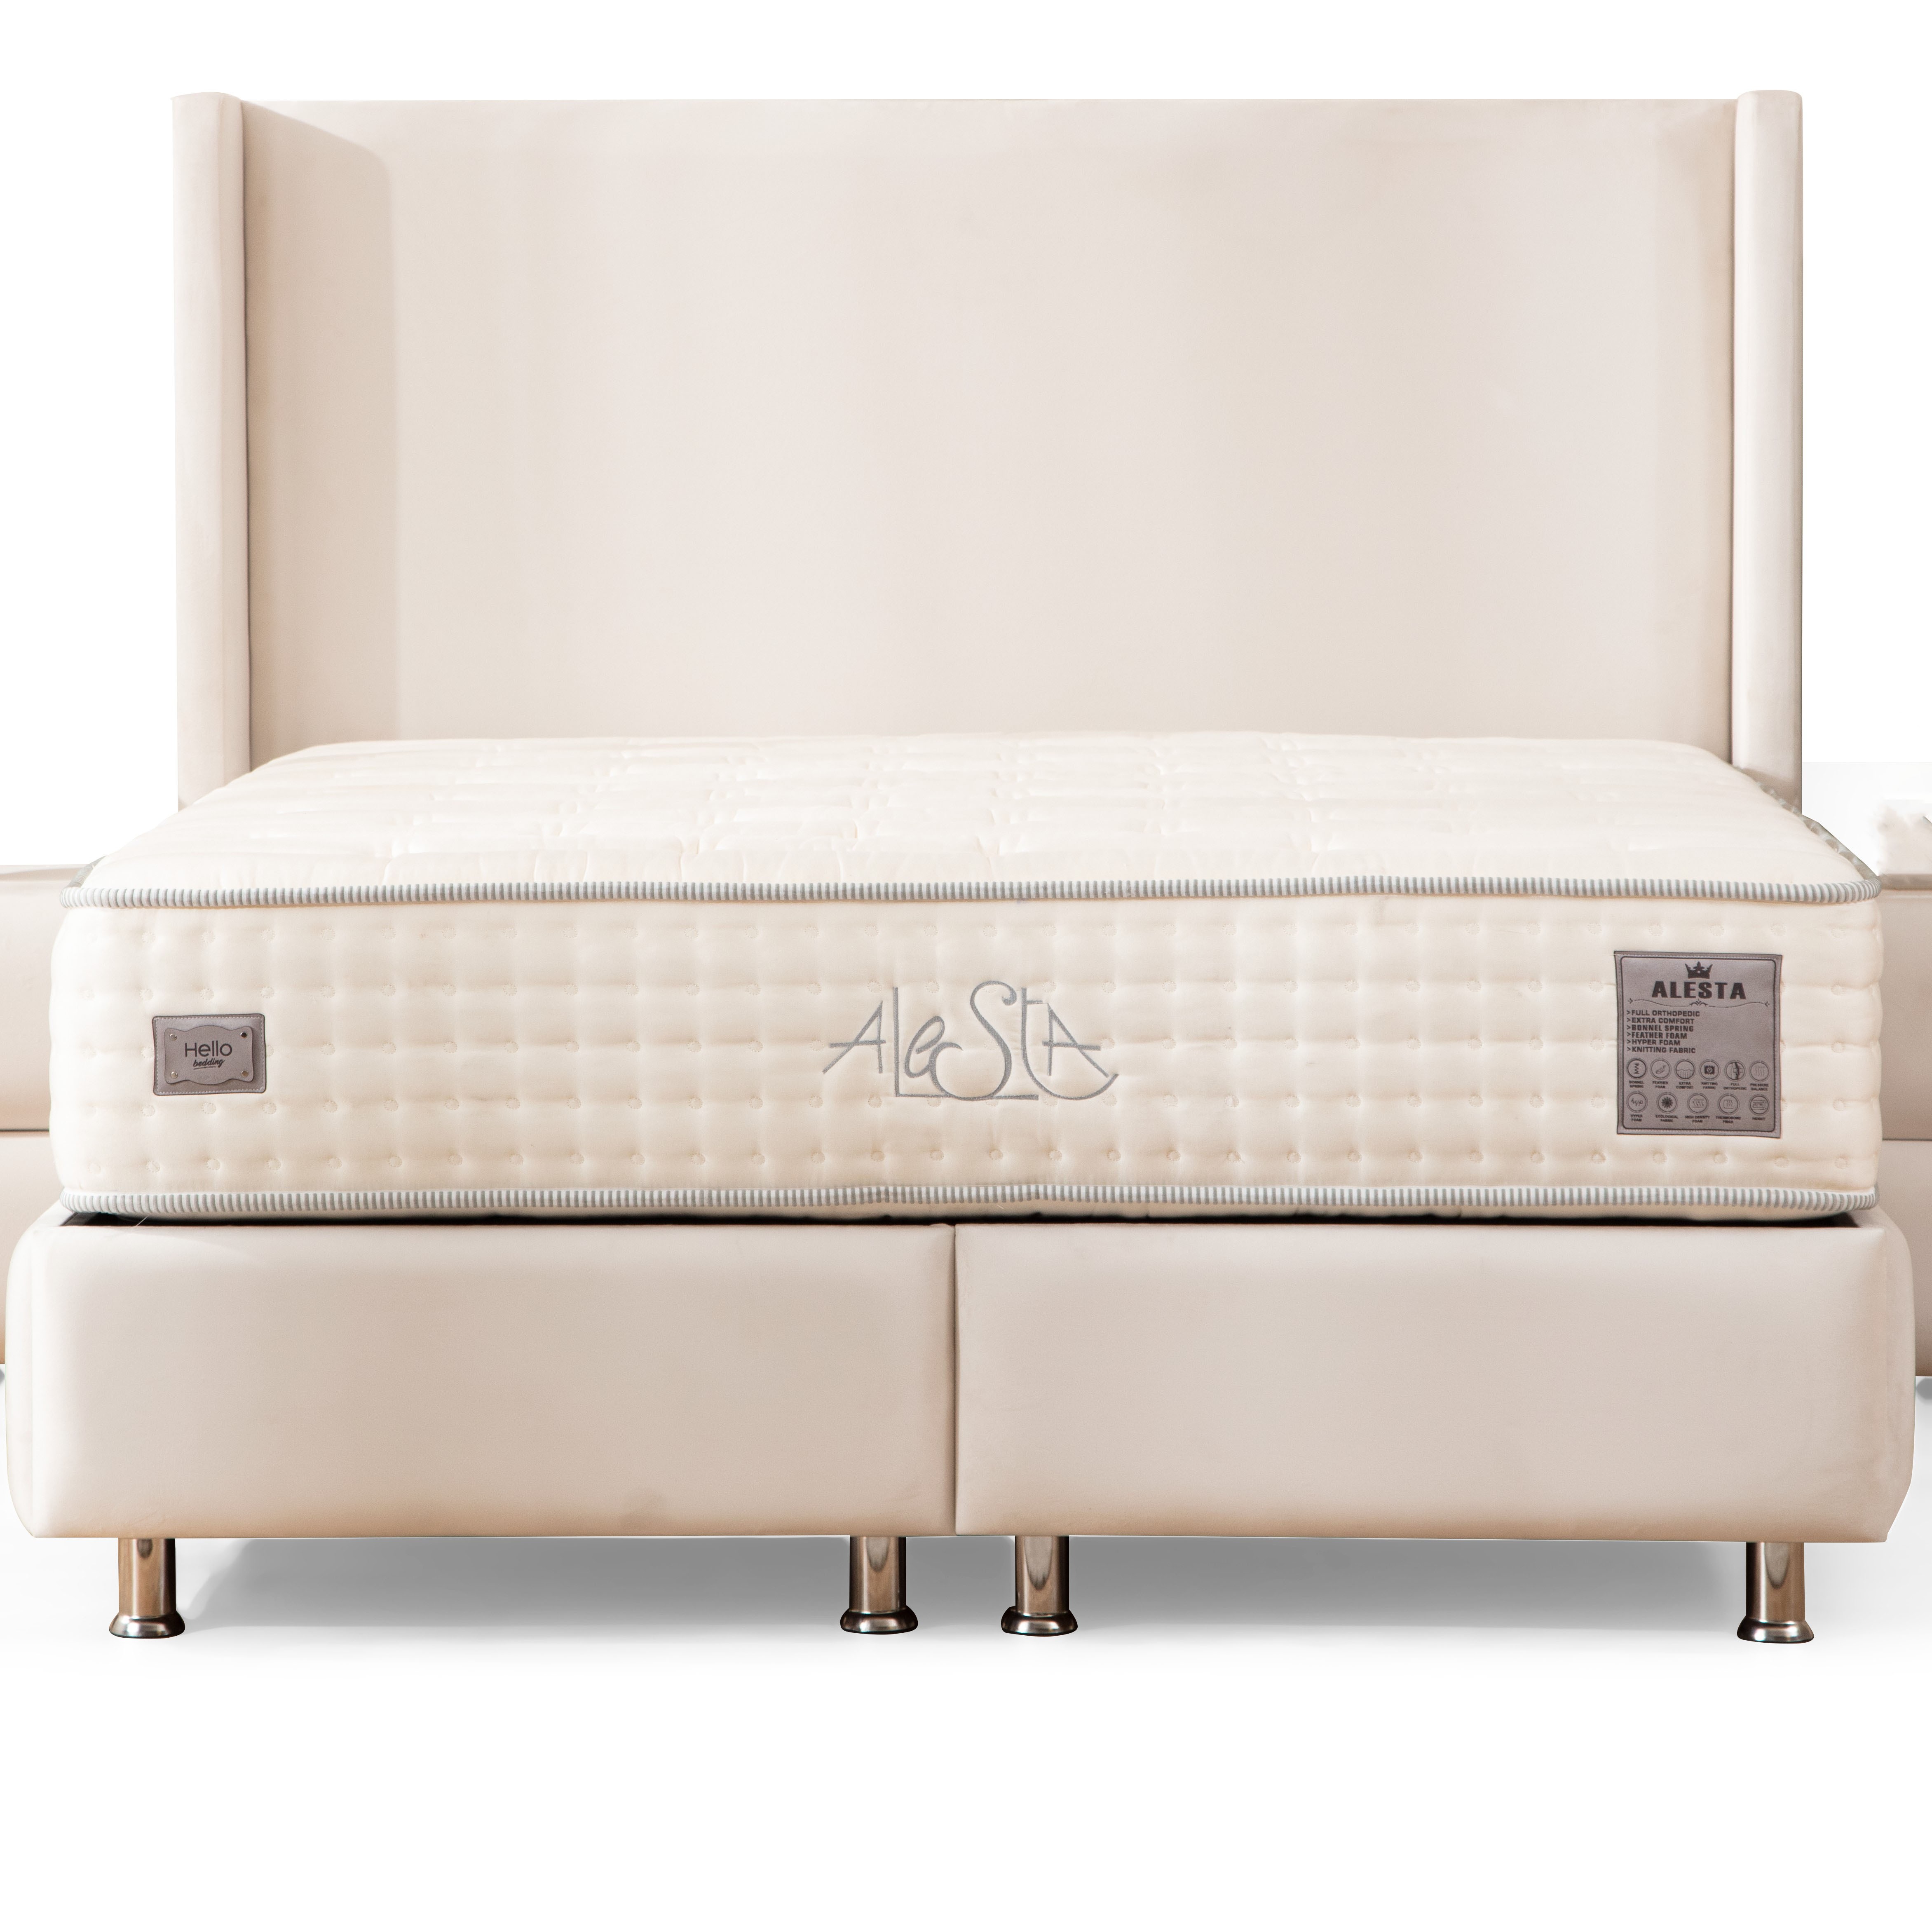 Lucca Bed With Storage 120x200 cm